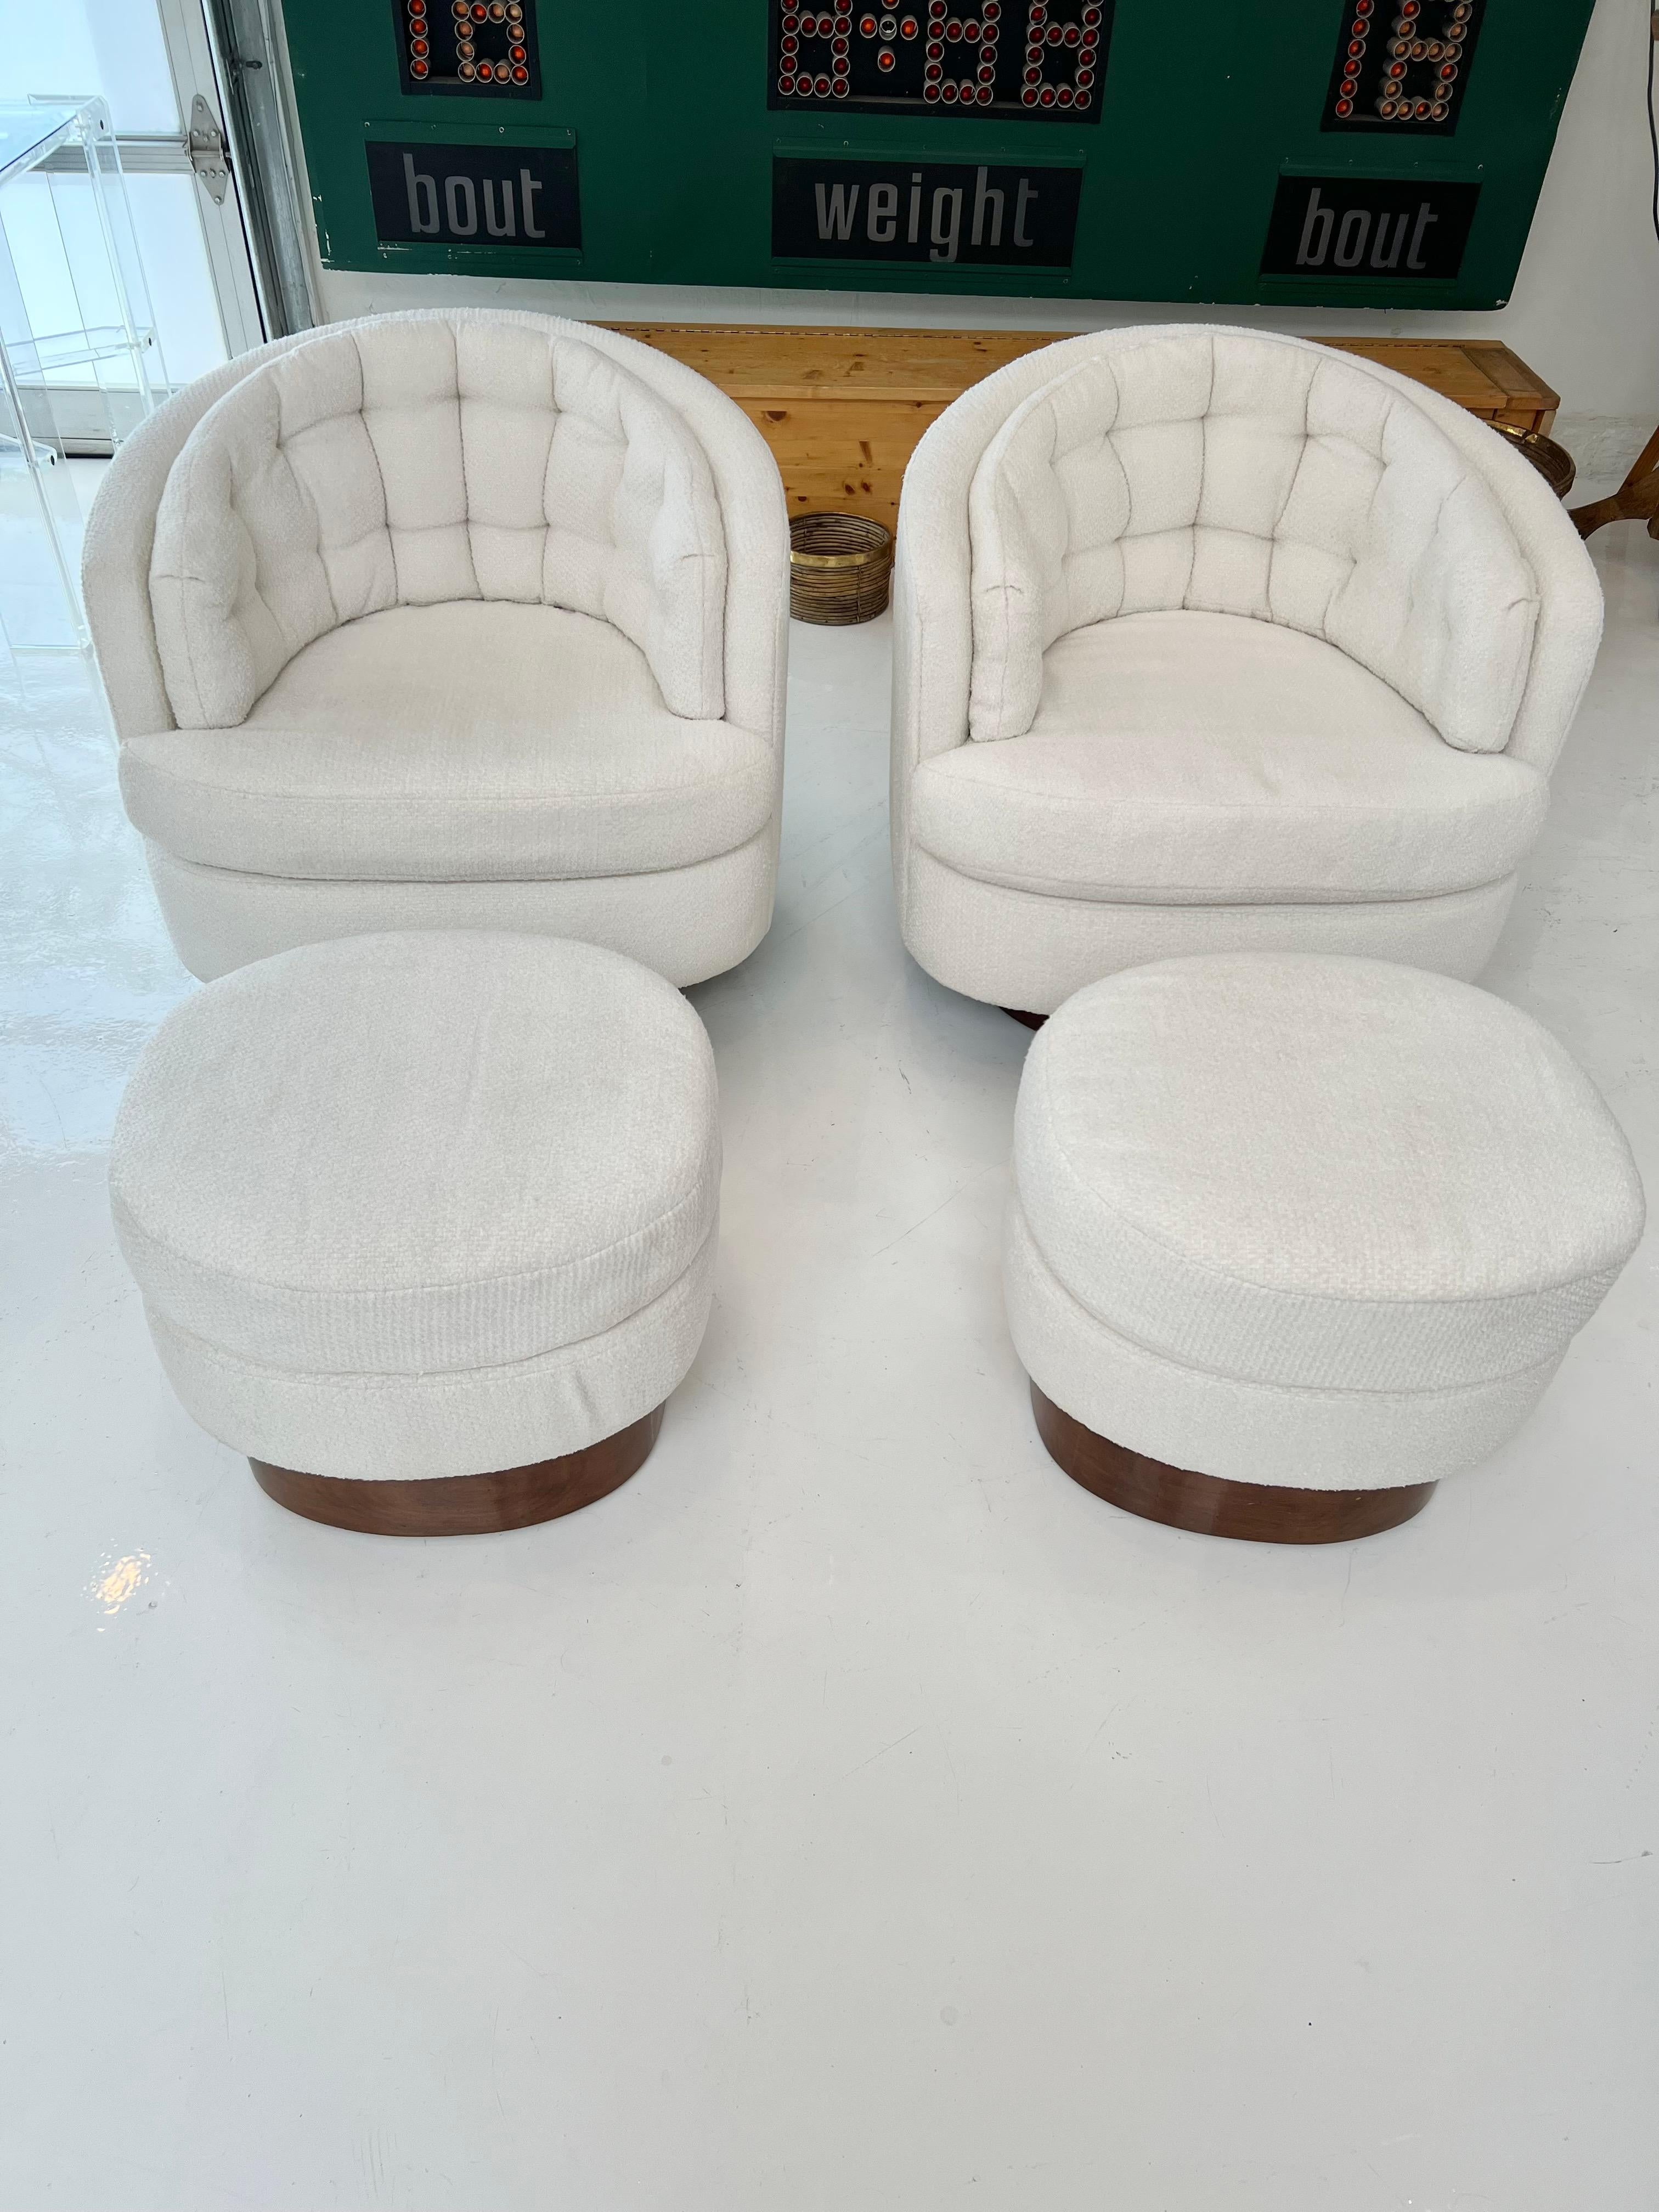 American Milo Baughman Boucle Swivel Chairs with Matching Ottomans, 1960s USA